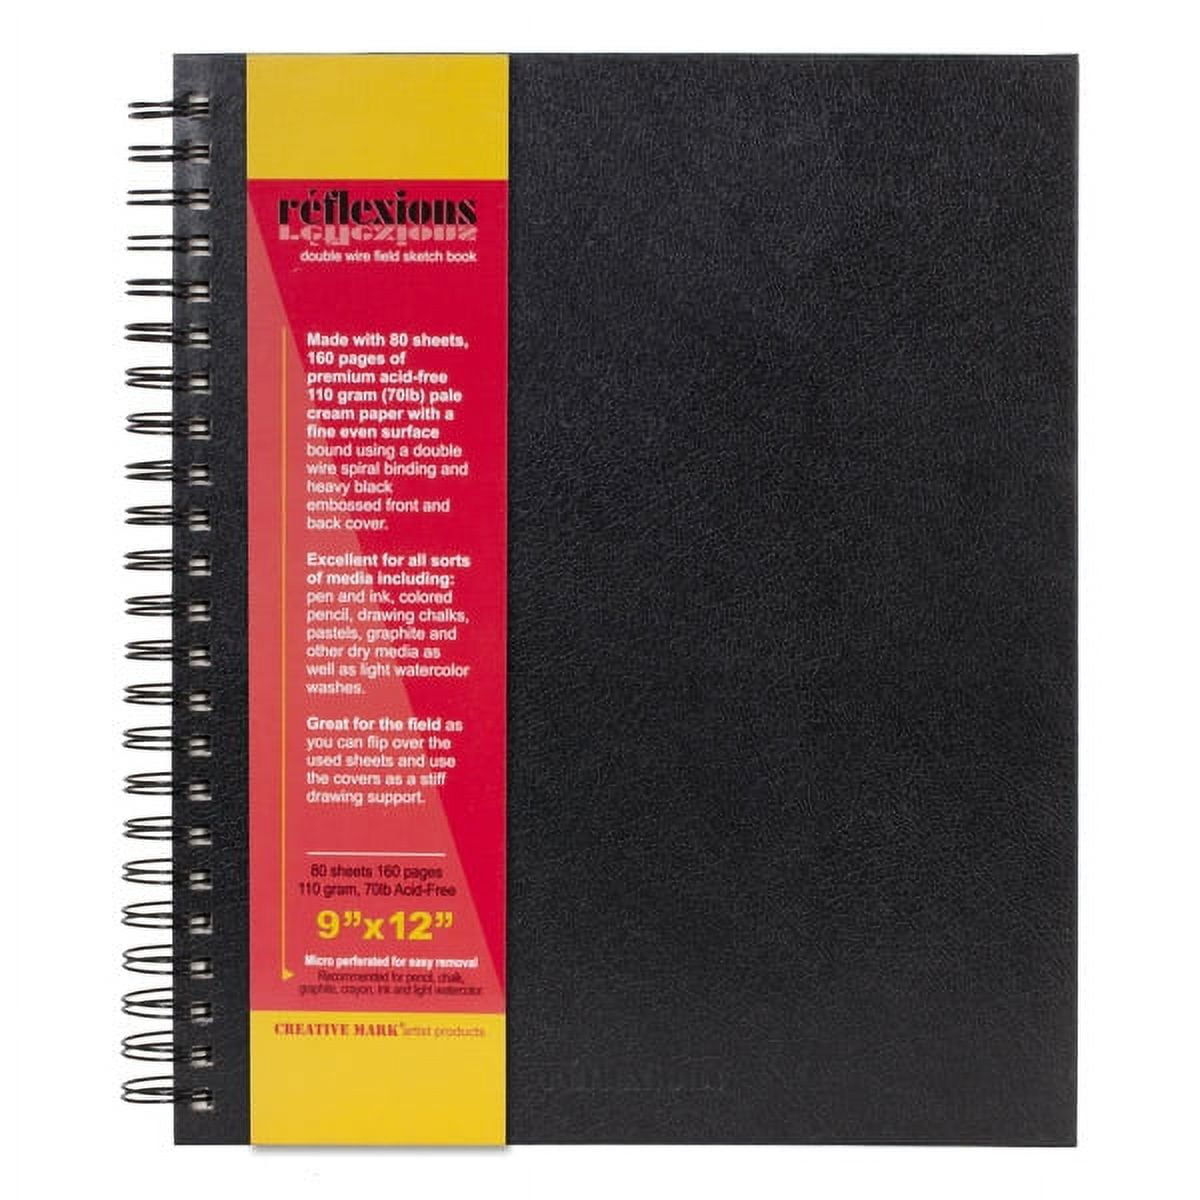  U.S. Art Supply 11 x 14 Mixed Media Paper Pad Sketchbook, 2  Pack, 60 Sheets, 98 lb (160 gsm) - Spiral-Bound, Perforated, Acid-Free -  Artist Sketching, Drawing, Painting Watercolor, Acrylic, Wet